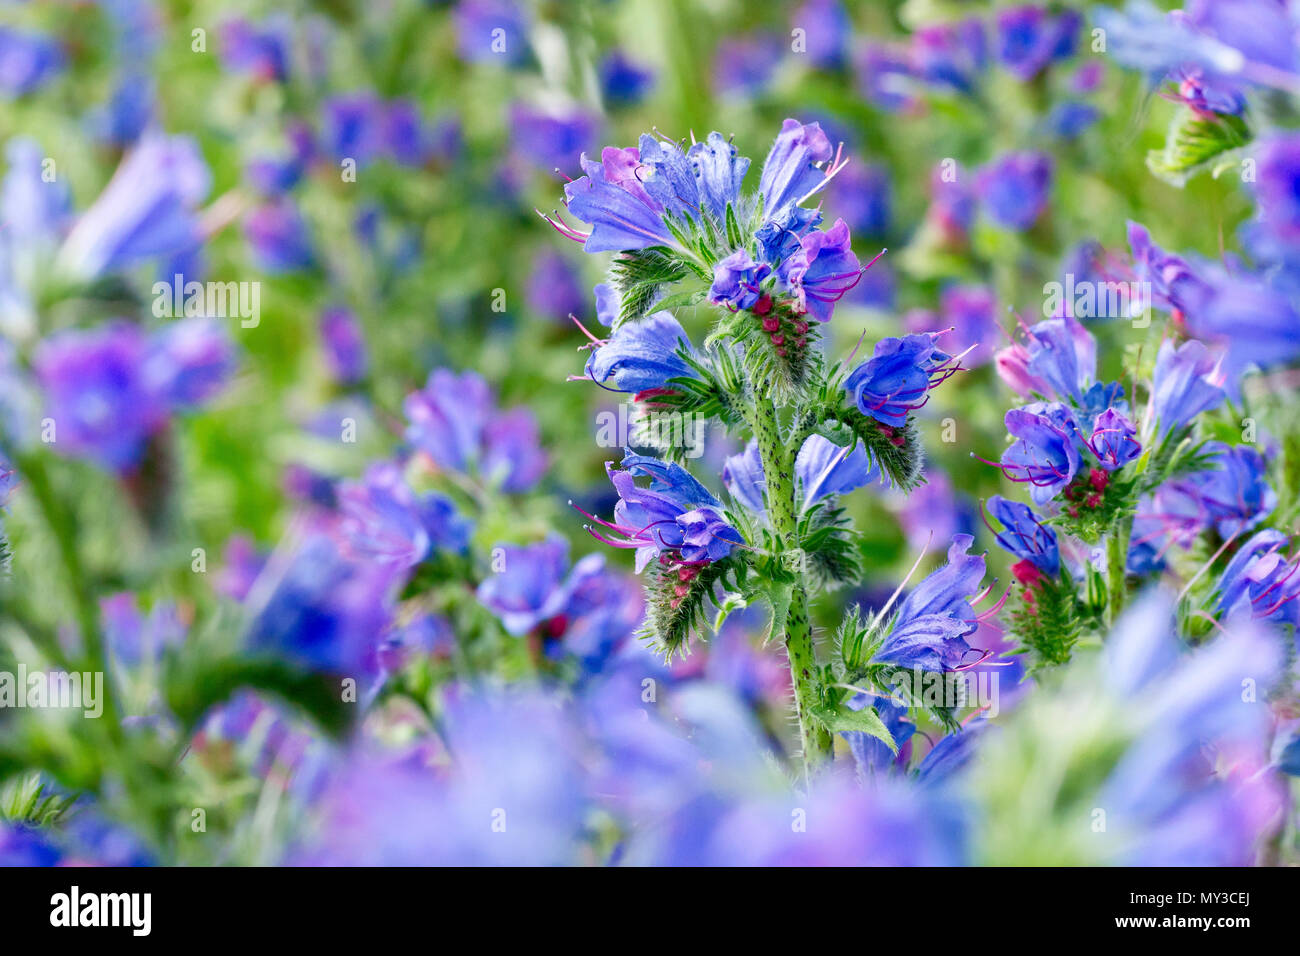 Viper's Bugloss (echium vulgare), a close up of a single flower head out of many. Stock Photo